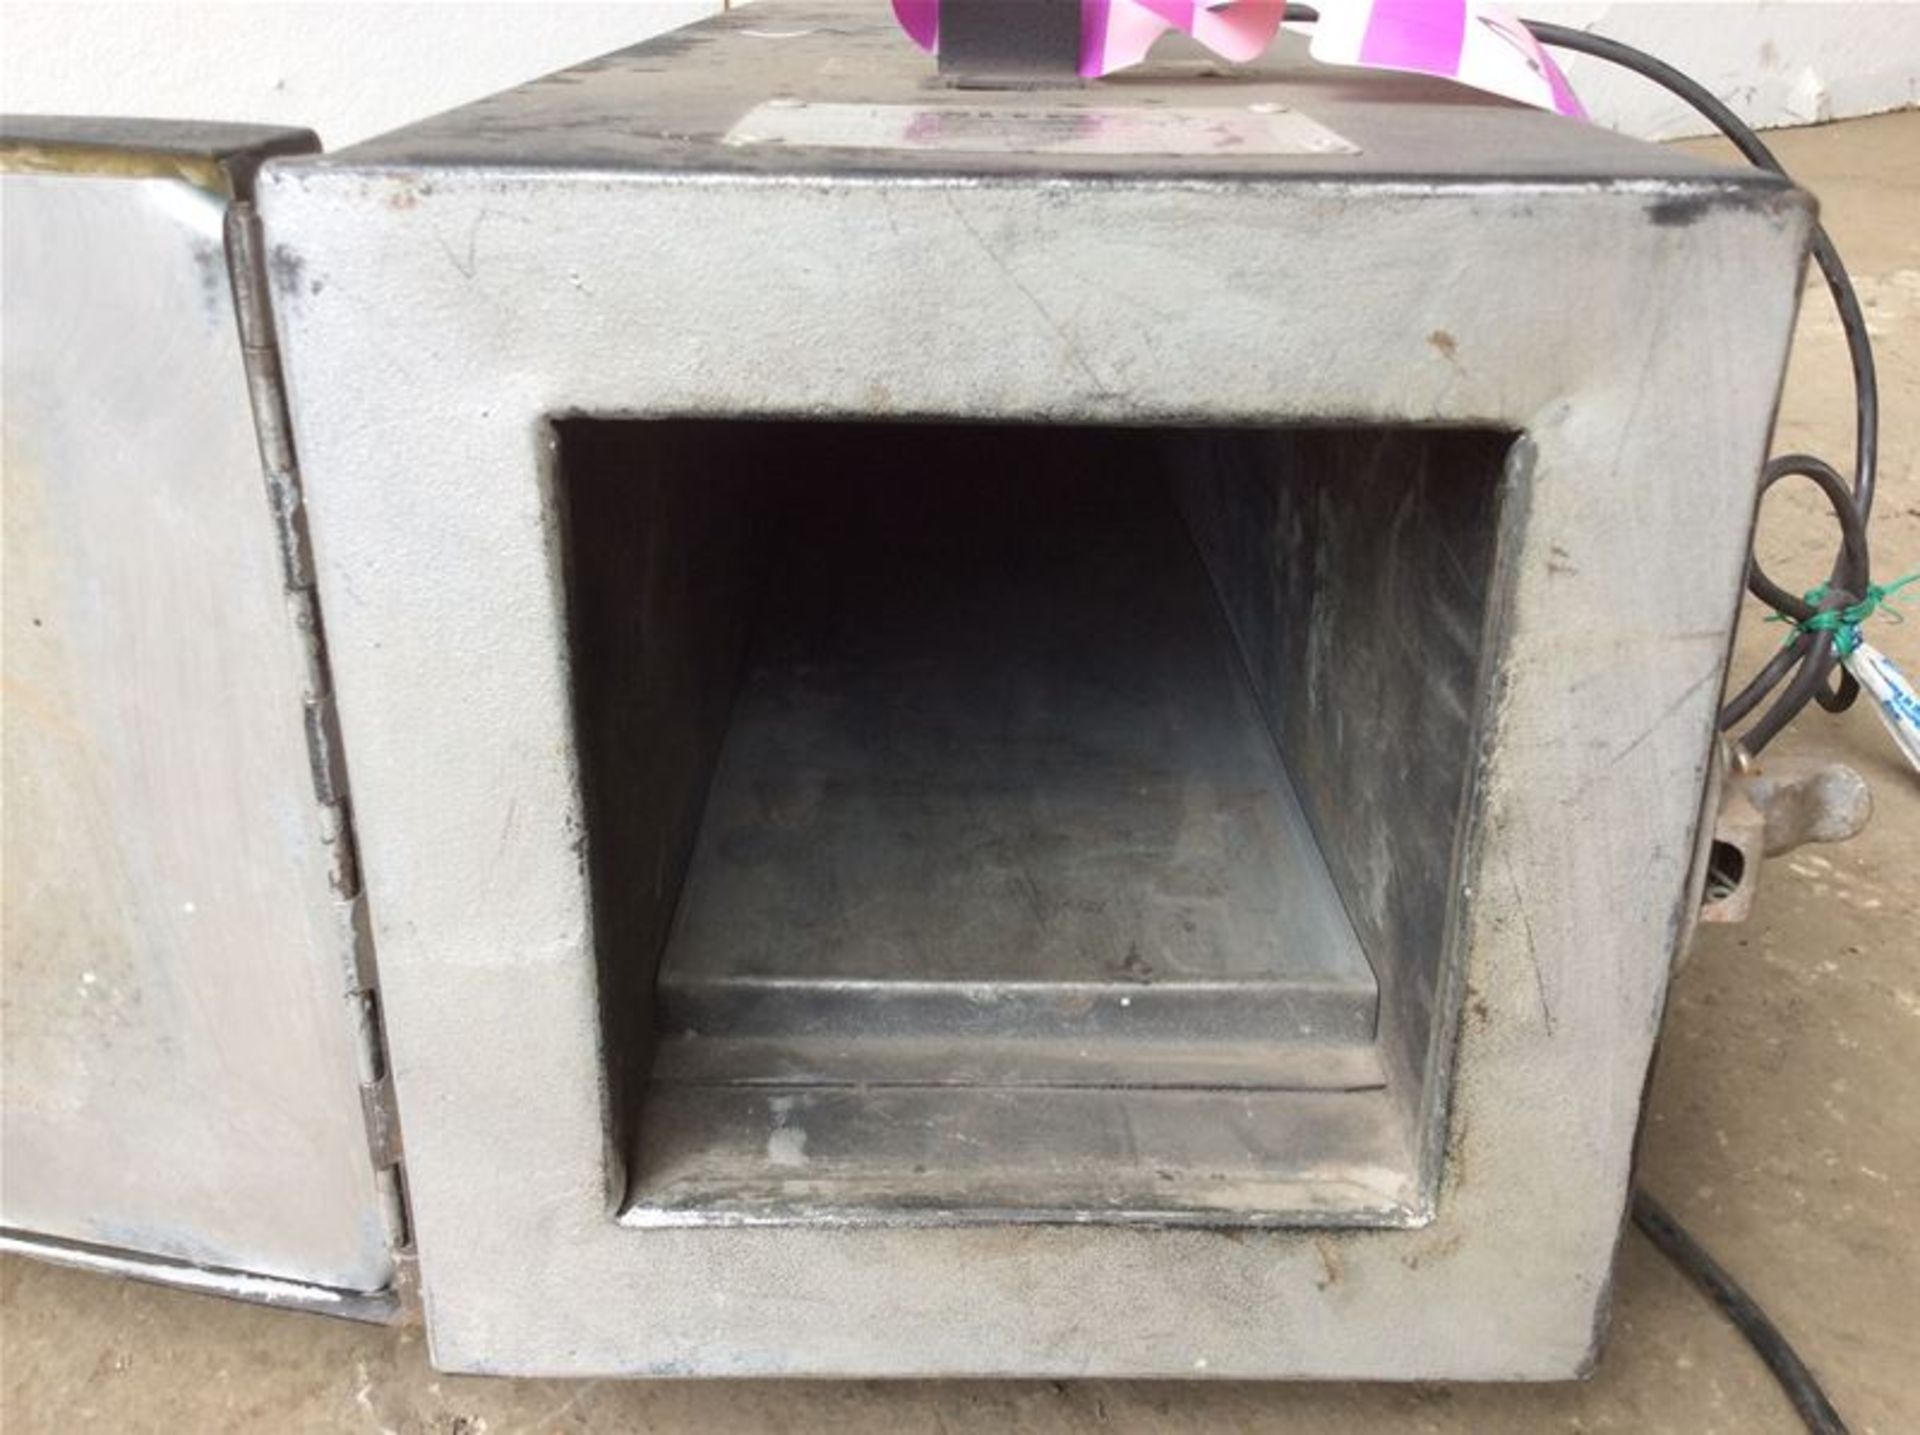 MITRE PORTABLE ROD DRYING OVEN - Image 2 of 2